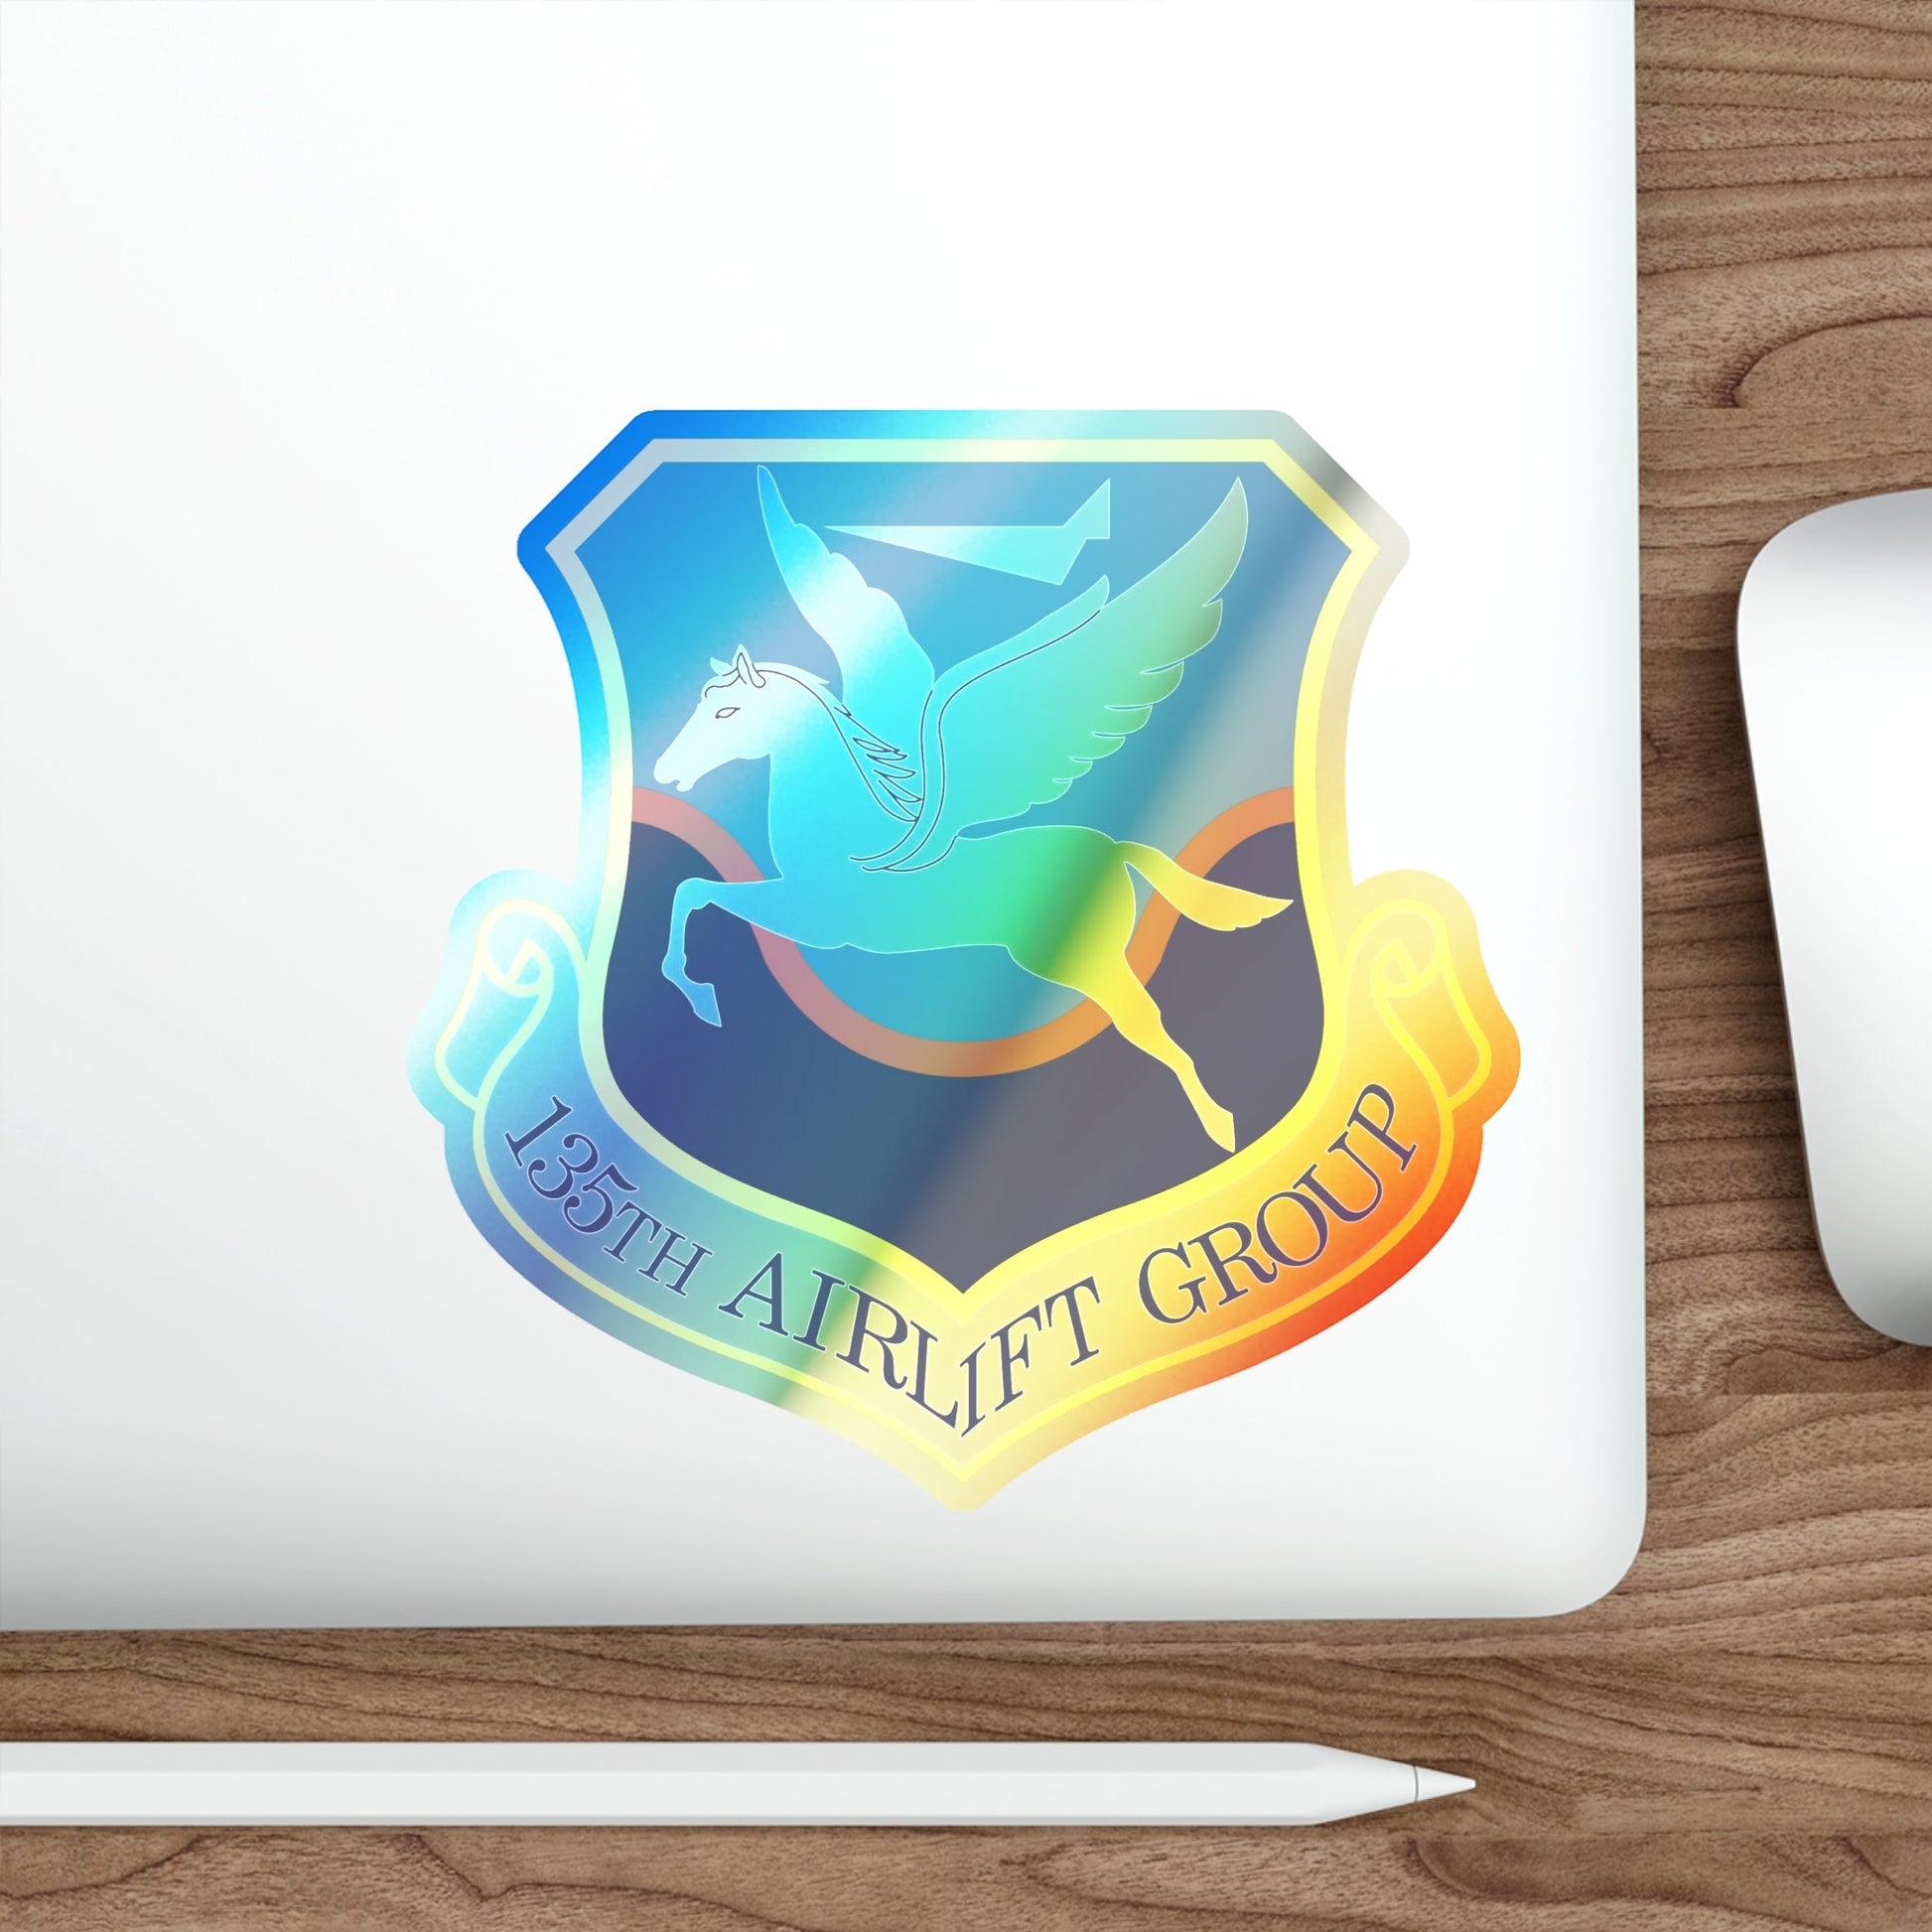 135th Airlift Group (U.S. Air Force) Holographic STICKER Die-Cut Vinyl Decal-The Sticker Space